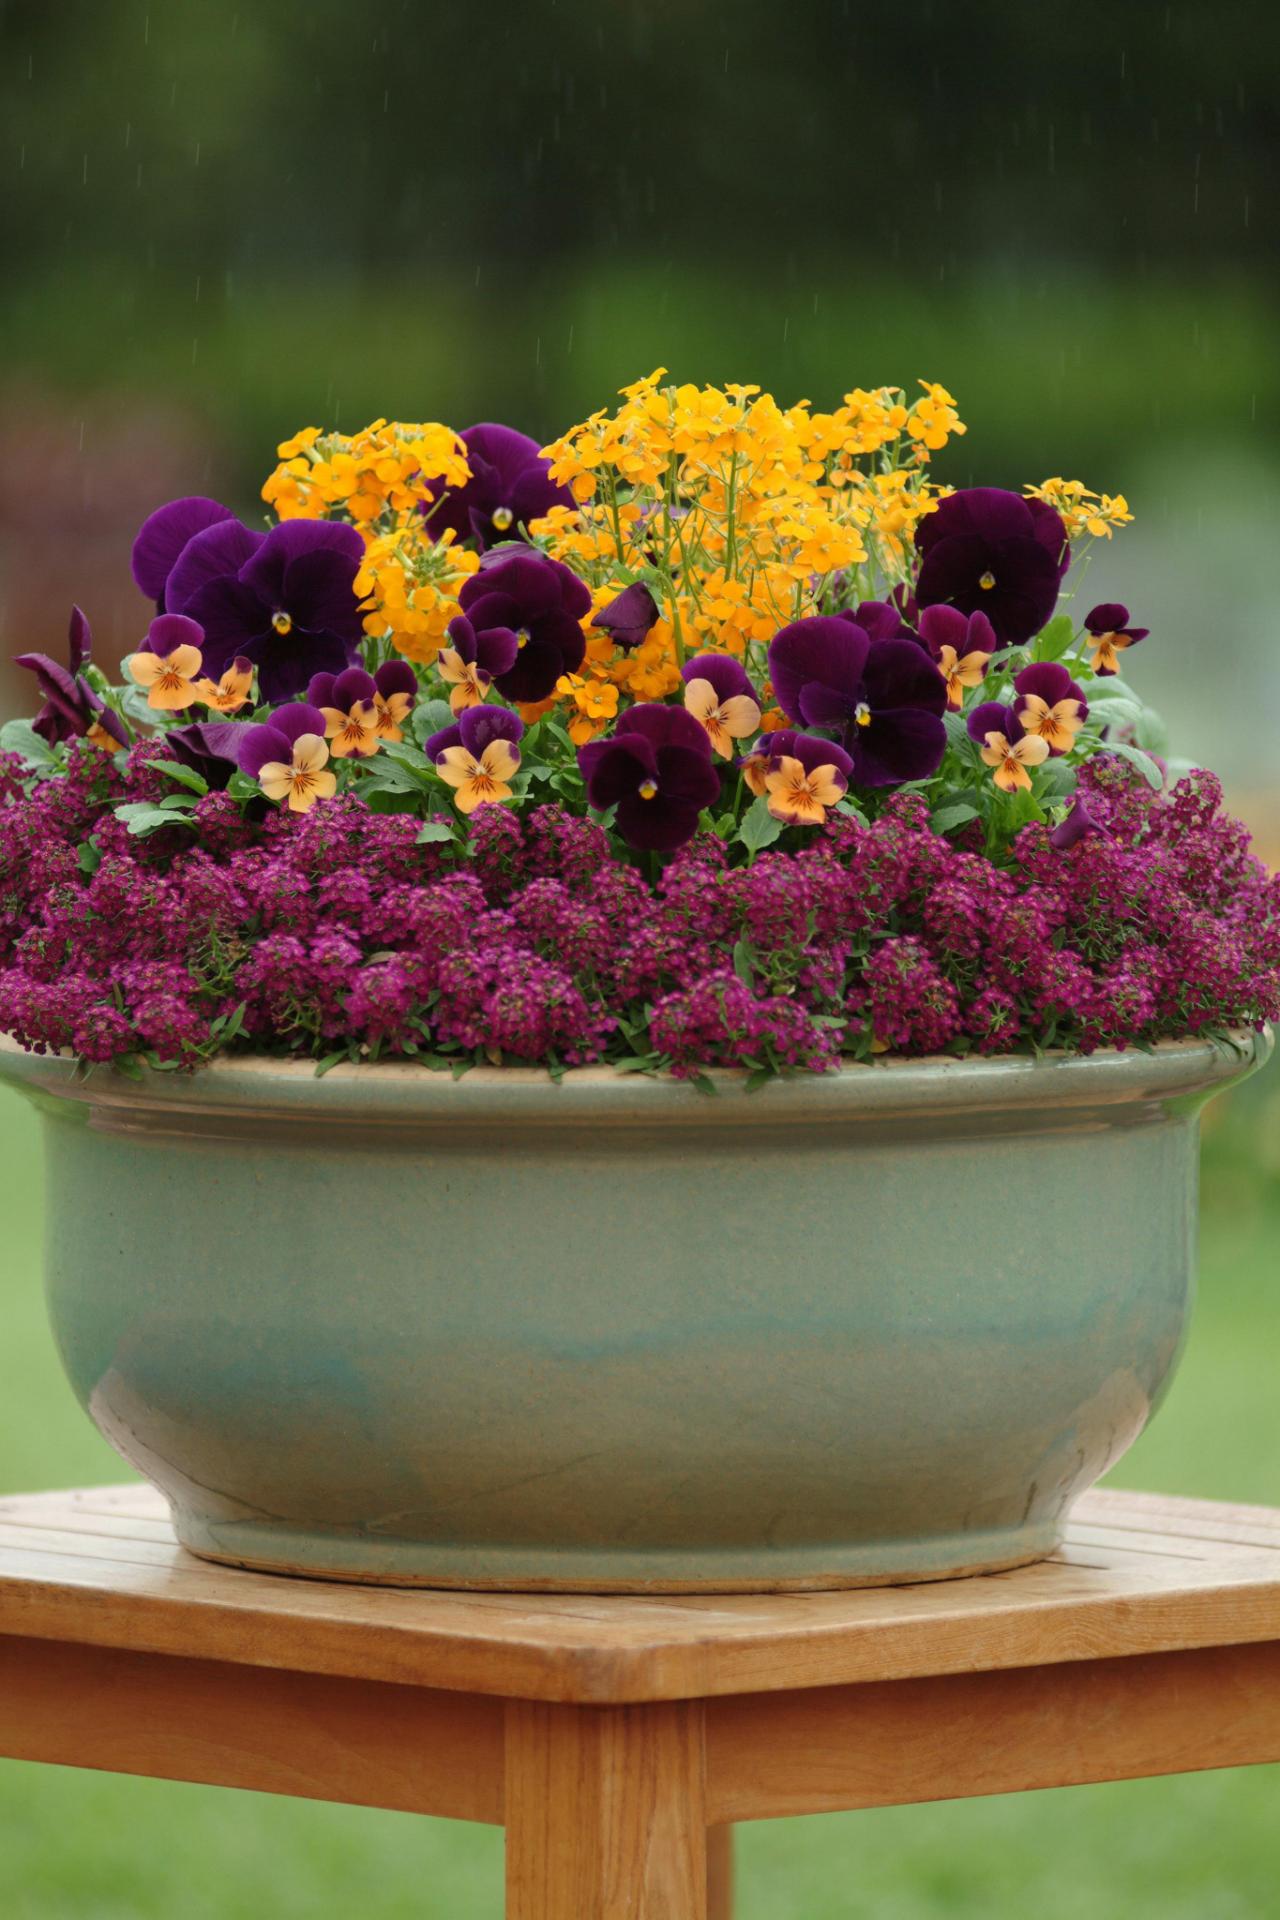 Pansies and Violas container garden idea for spring